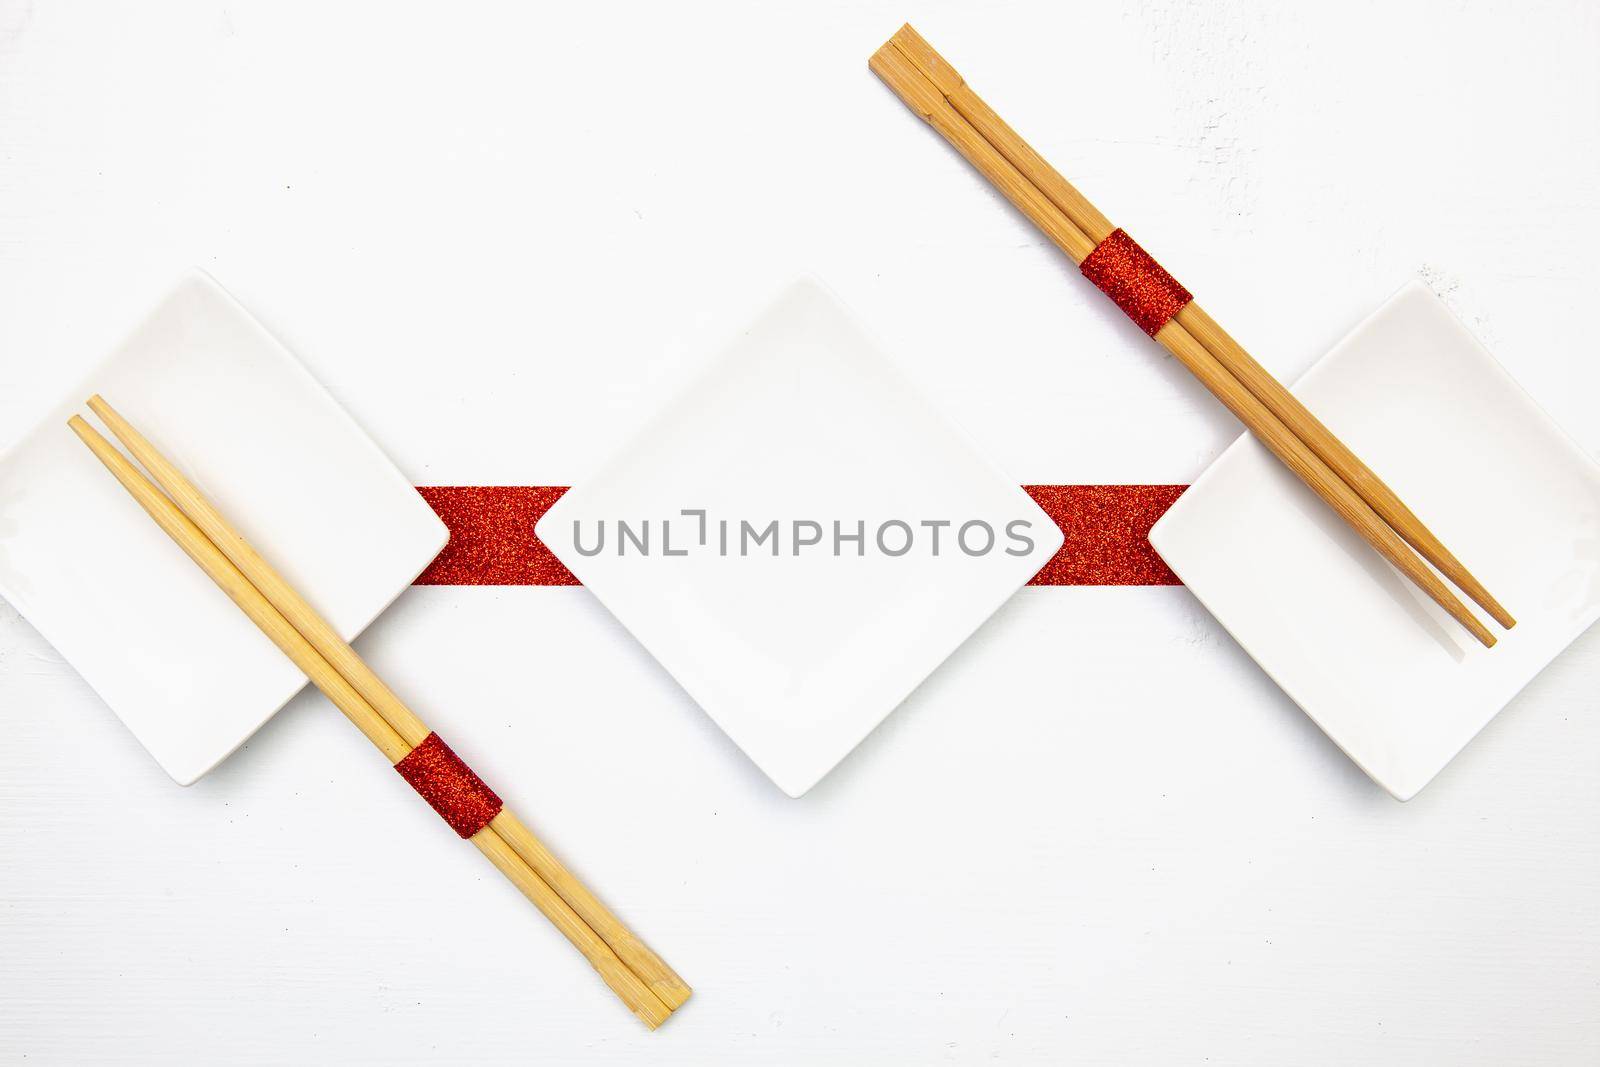 Ceramic bowls  and bamboo chopsticks for sushi food with red and white decoration.